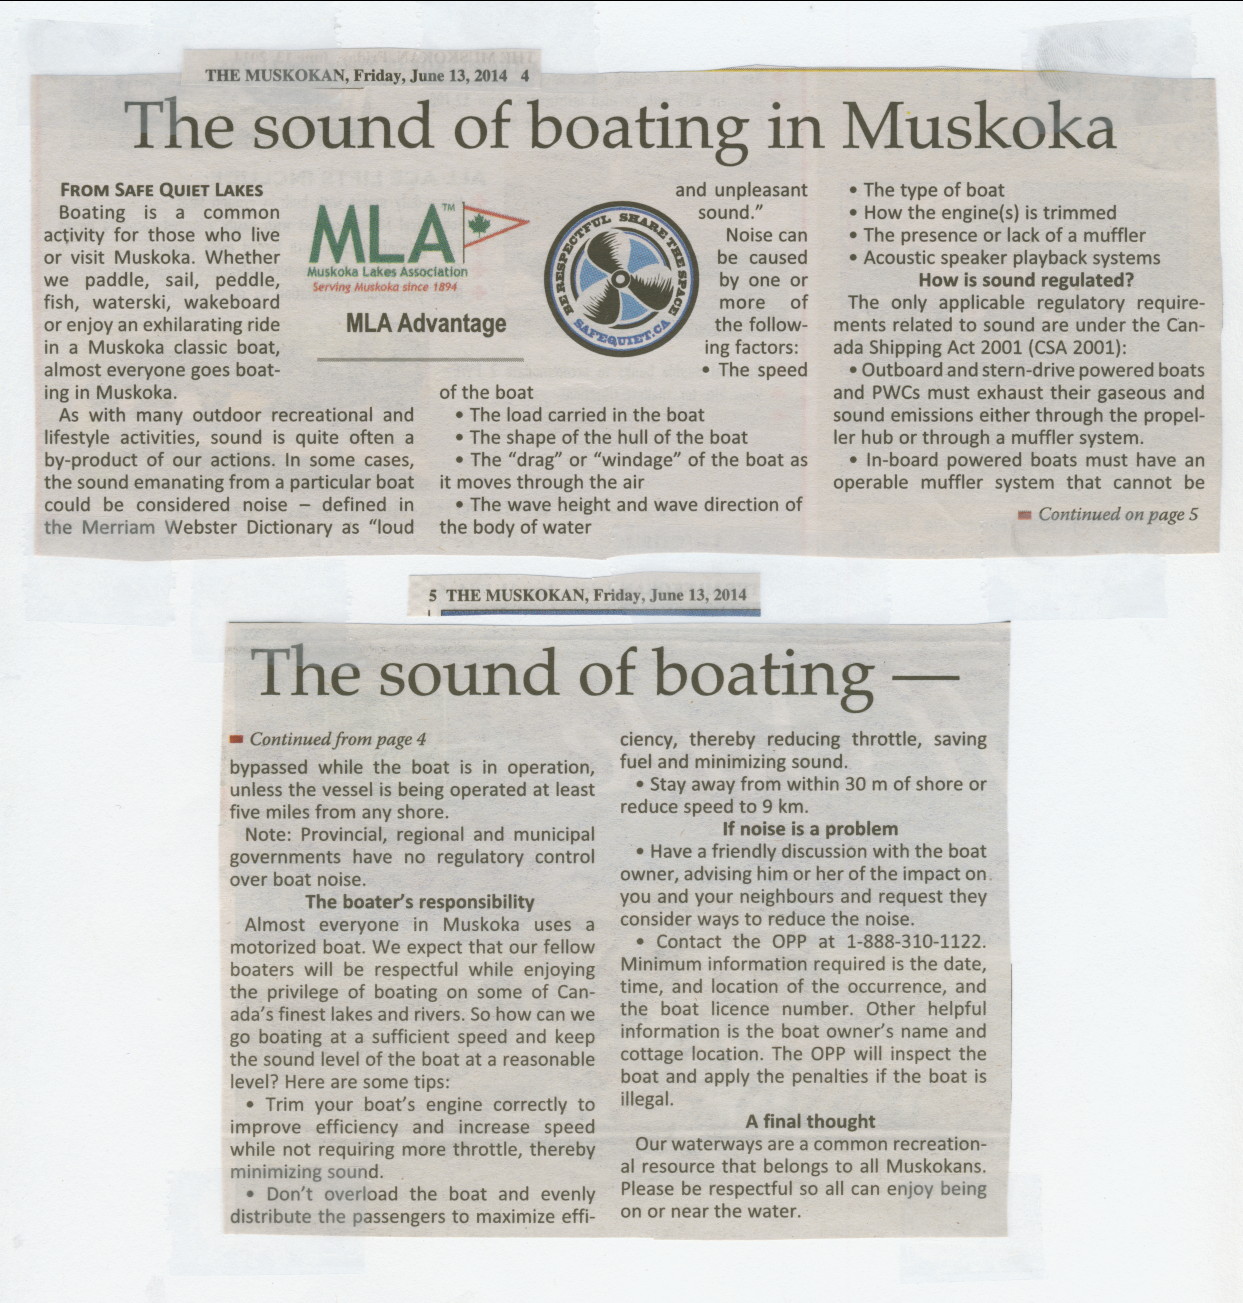 2014 - June 13 - The sound of boating in Muskoka - The Muskokan page 4 & 5